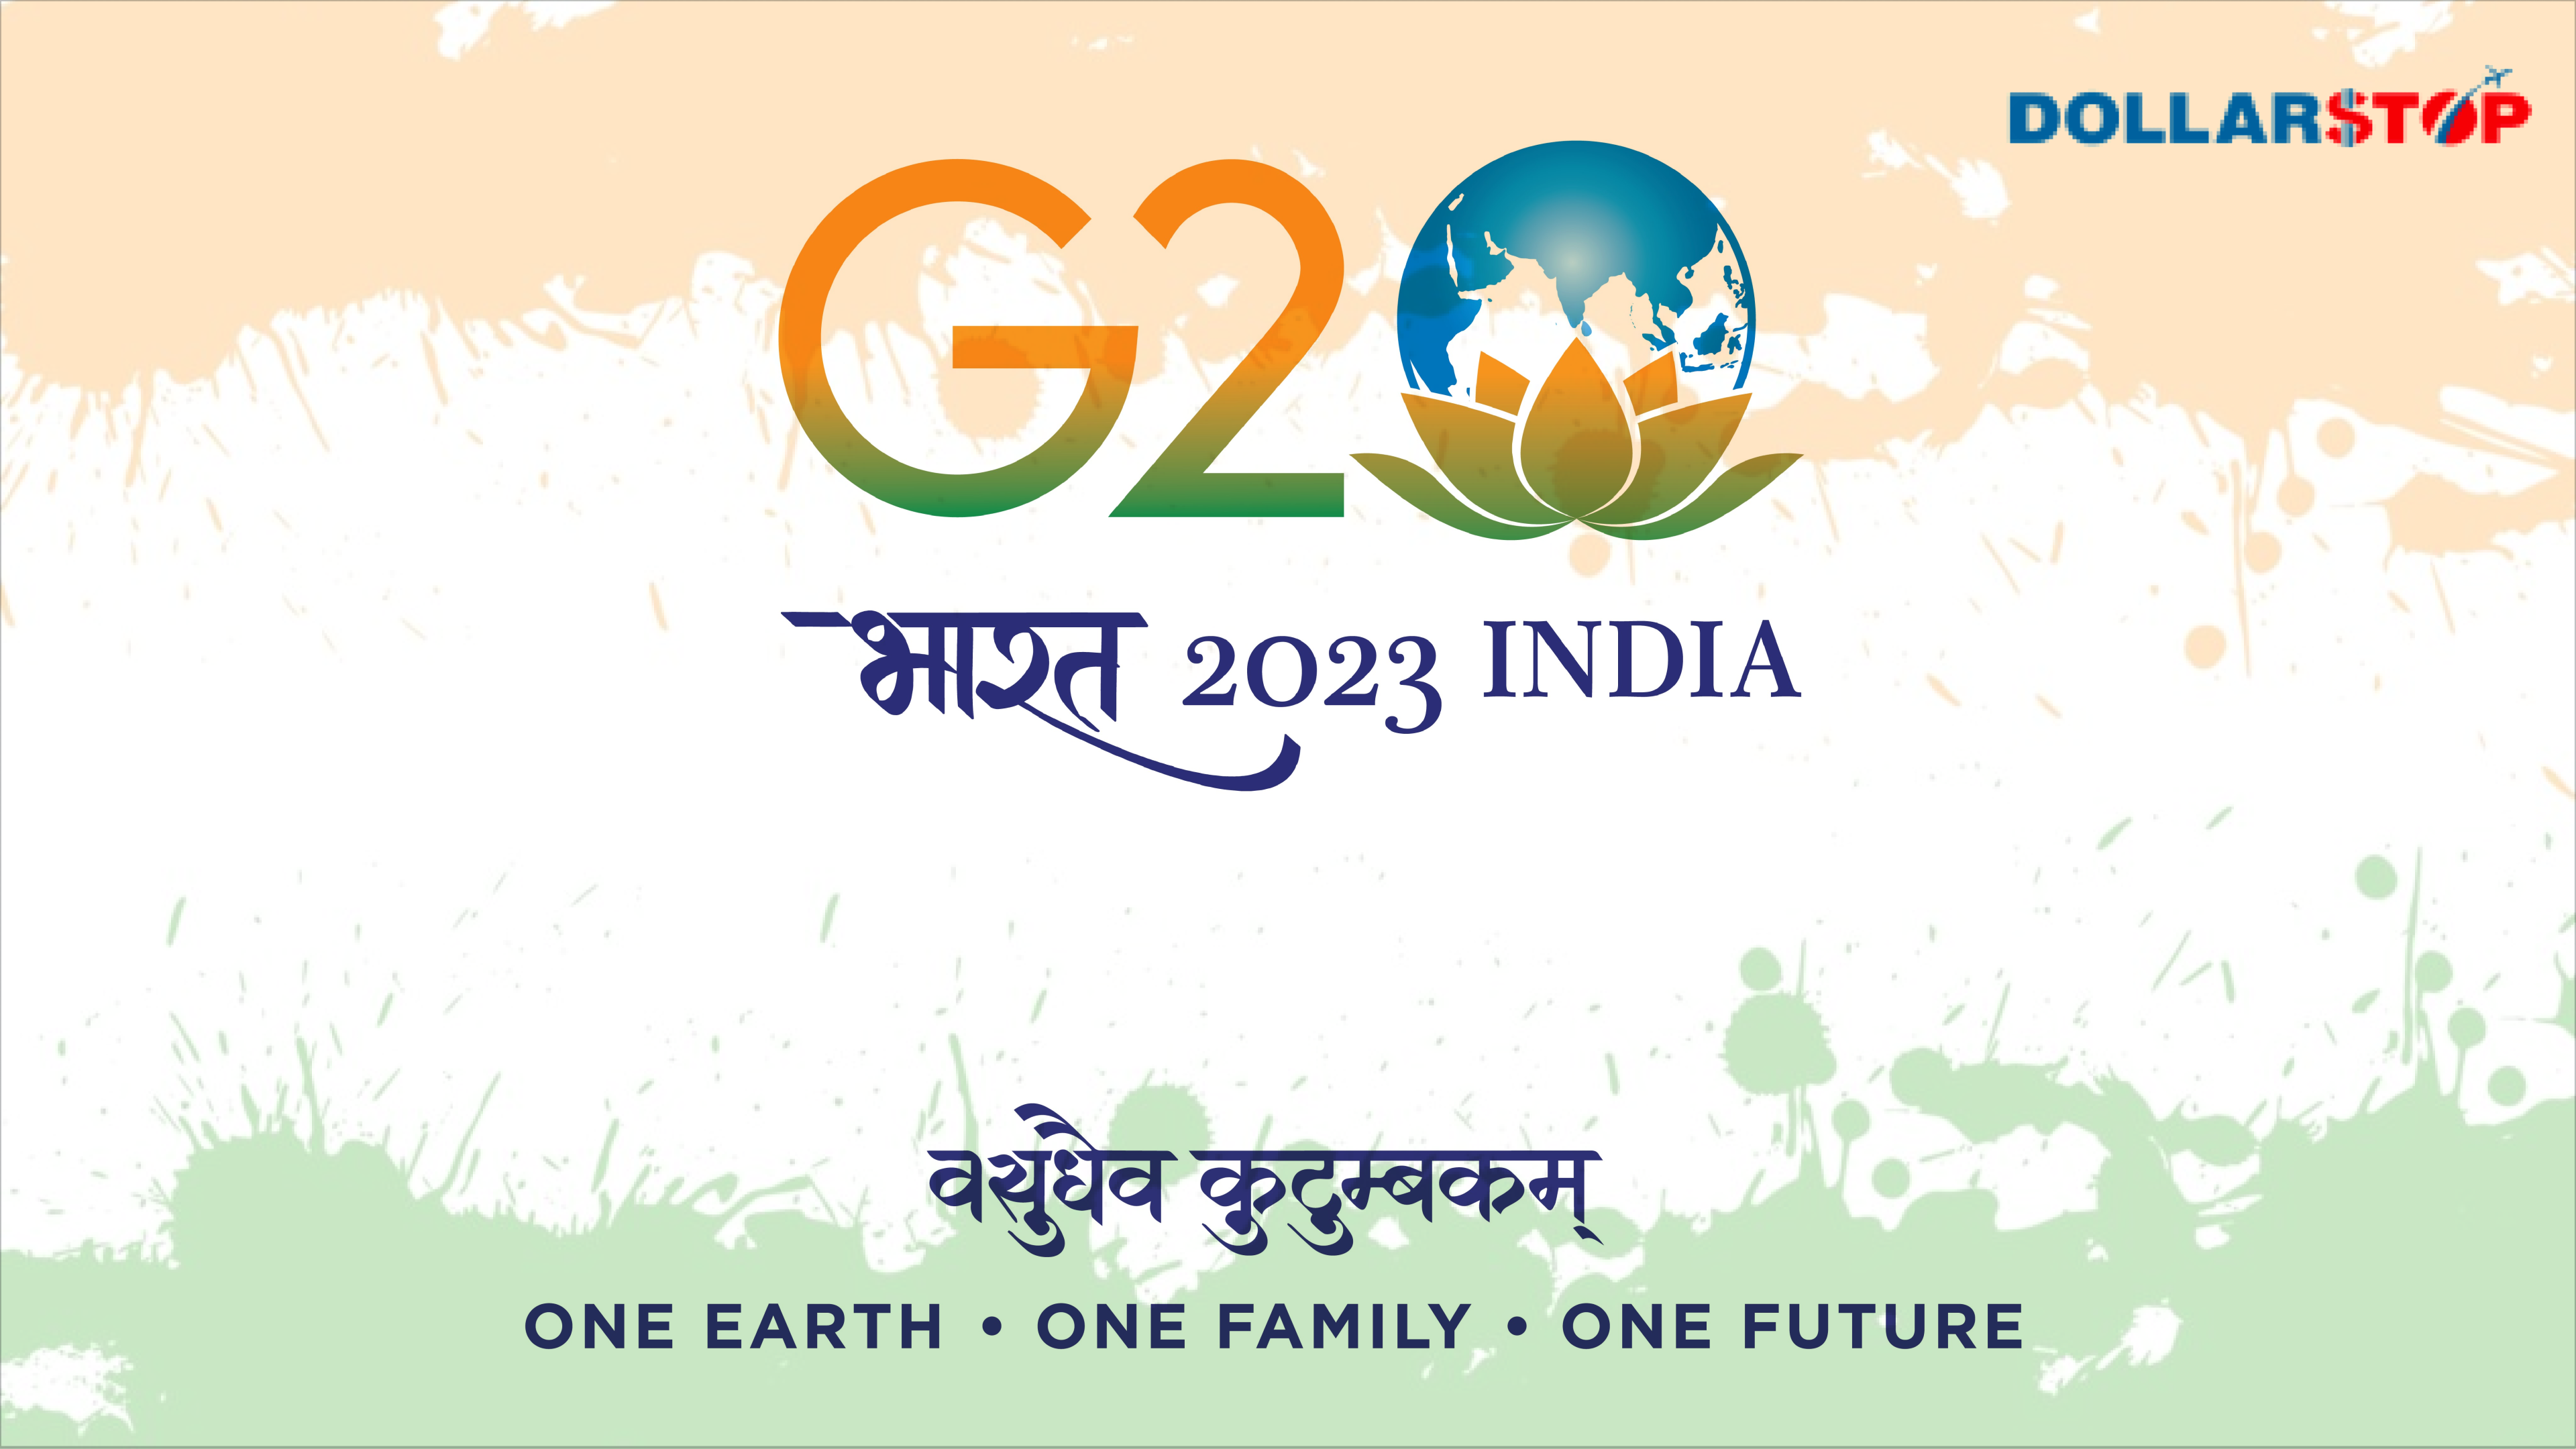 Will the Indian Rupee's Currency Value Increase in the Global Forex Market After the G20 2023 Summit?